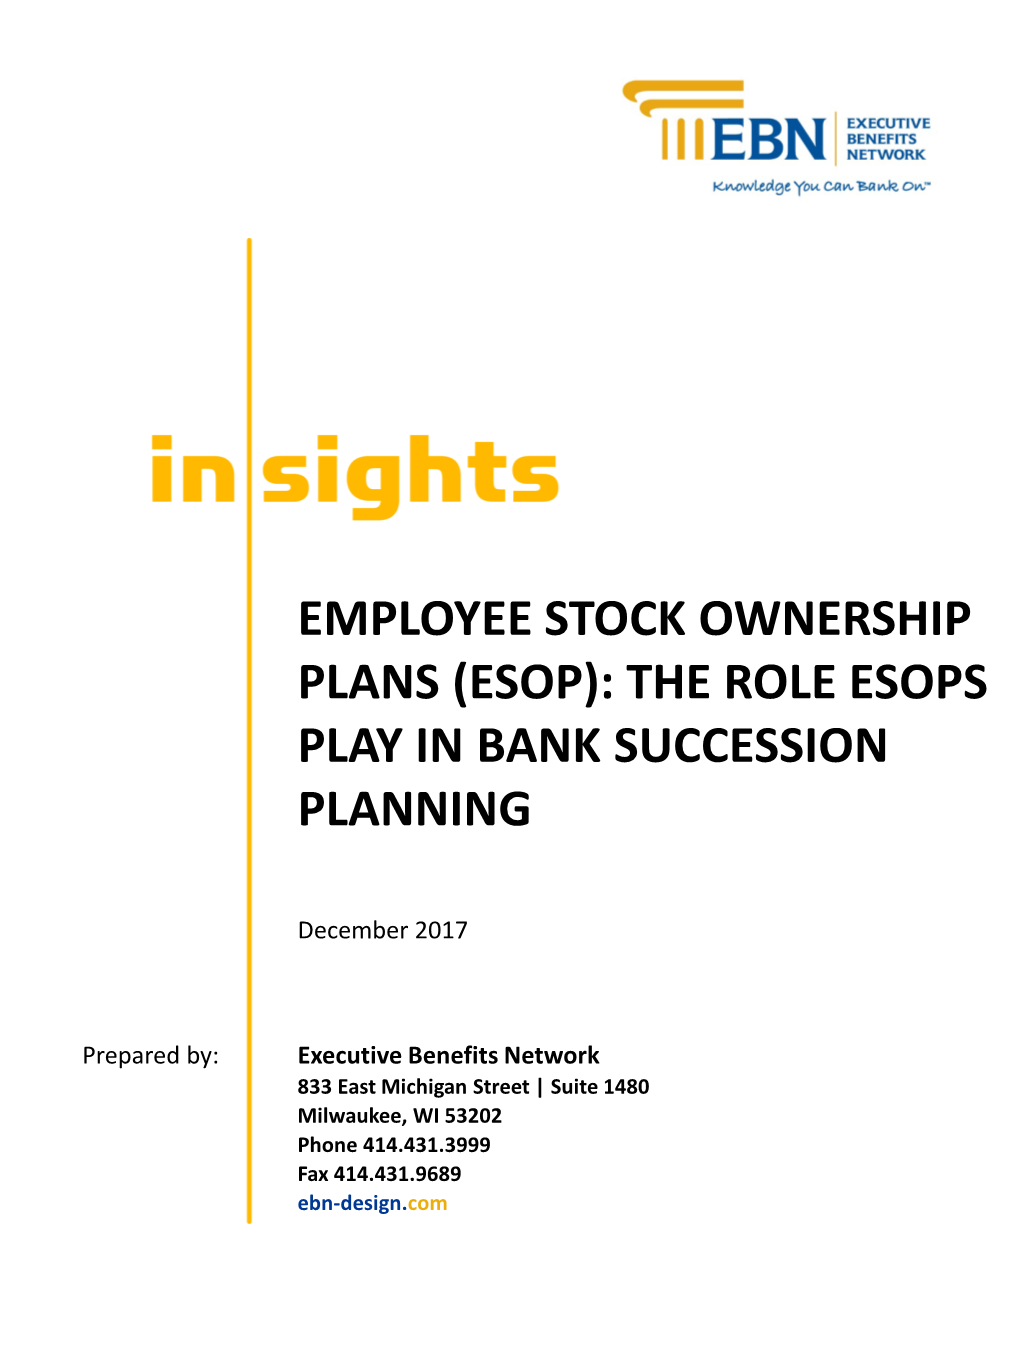 The Role Esops Play in Bank Succession Planning